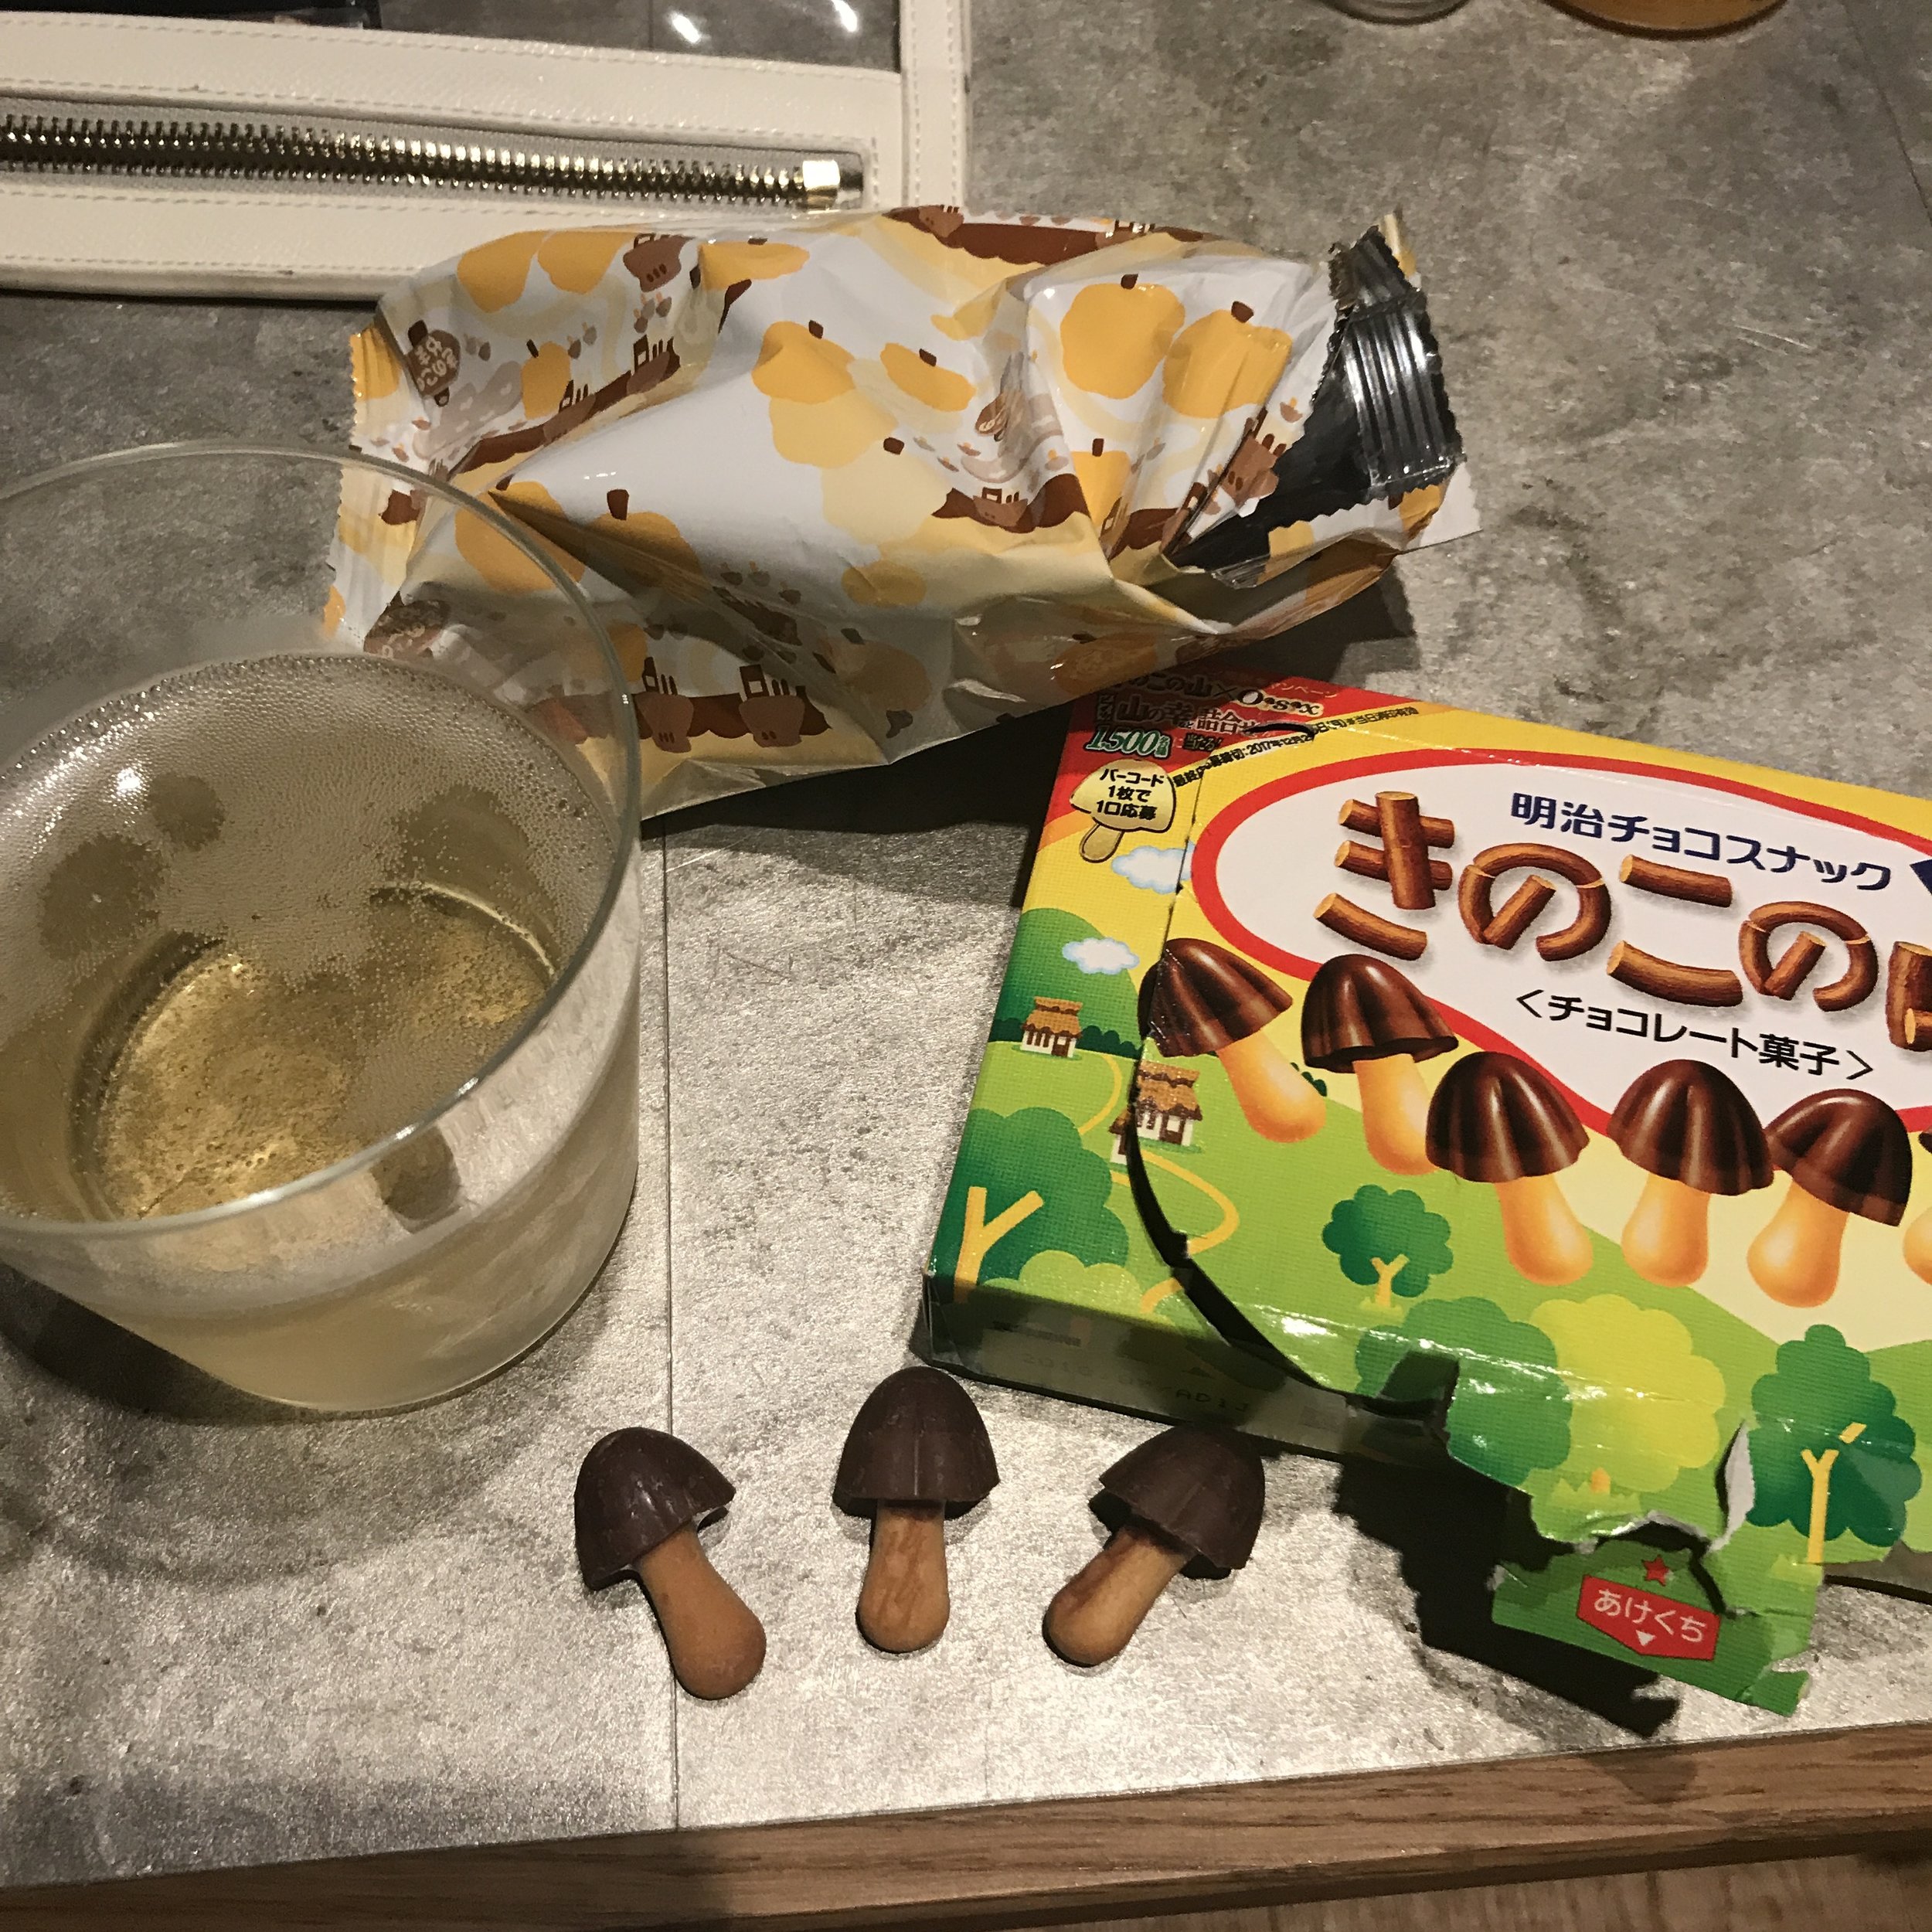 Later night Champagne and mushroom cookies